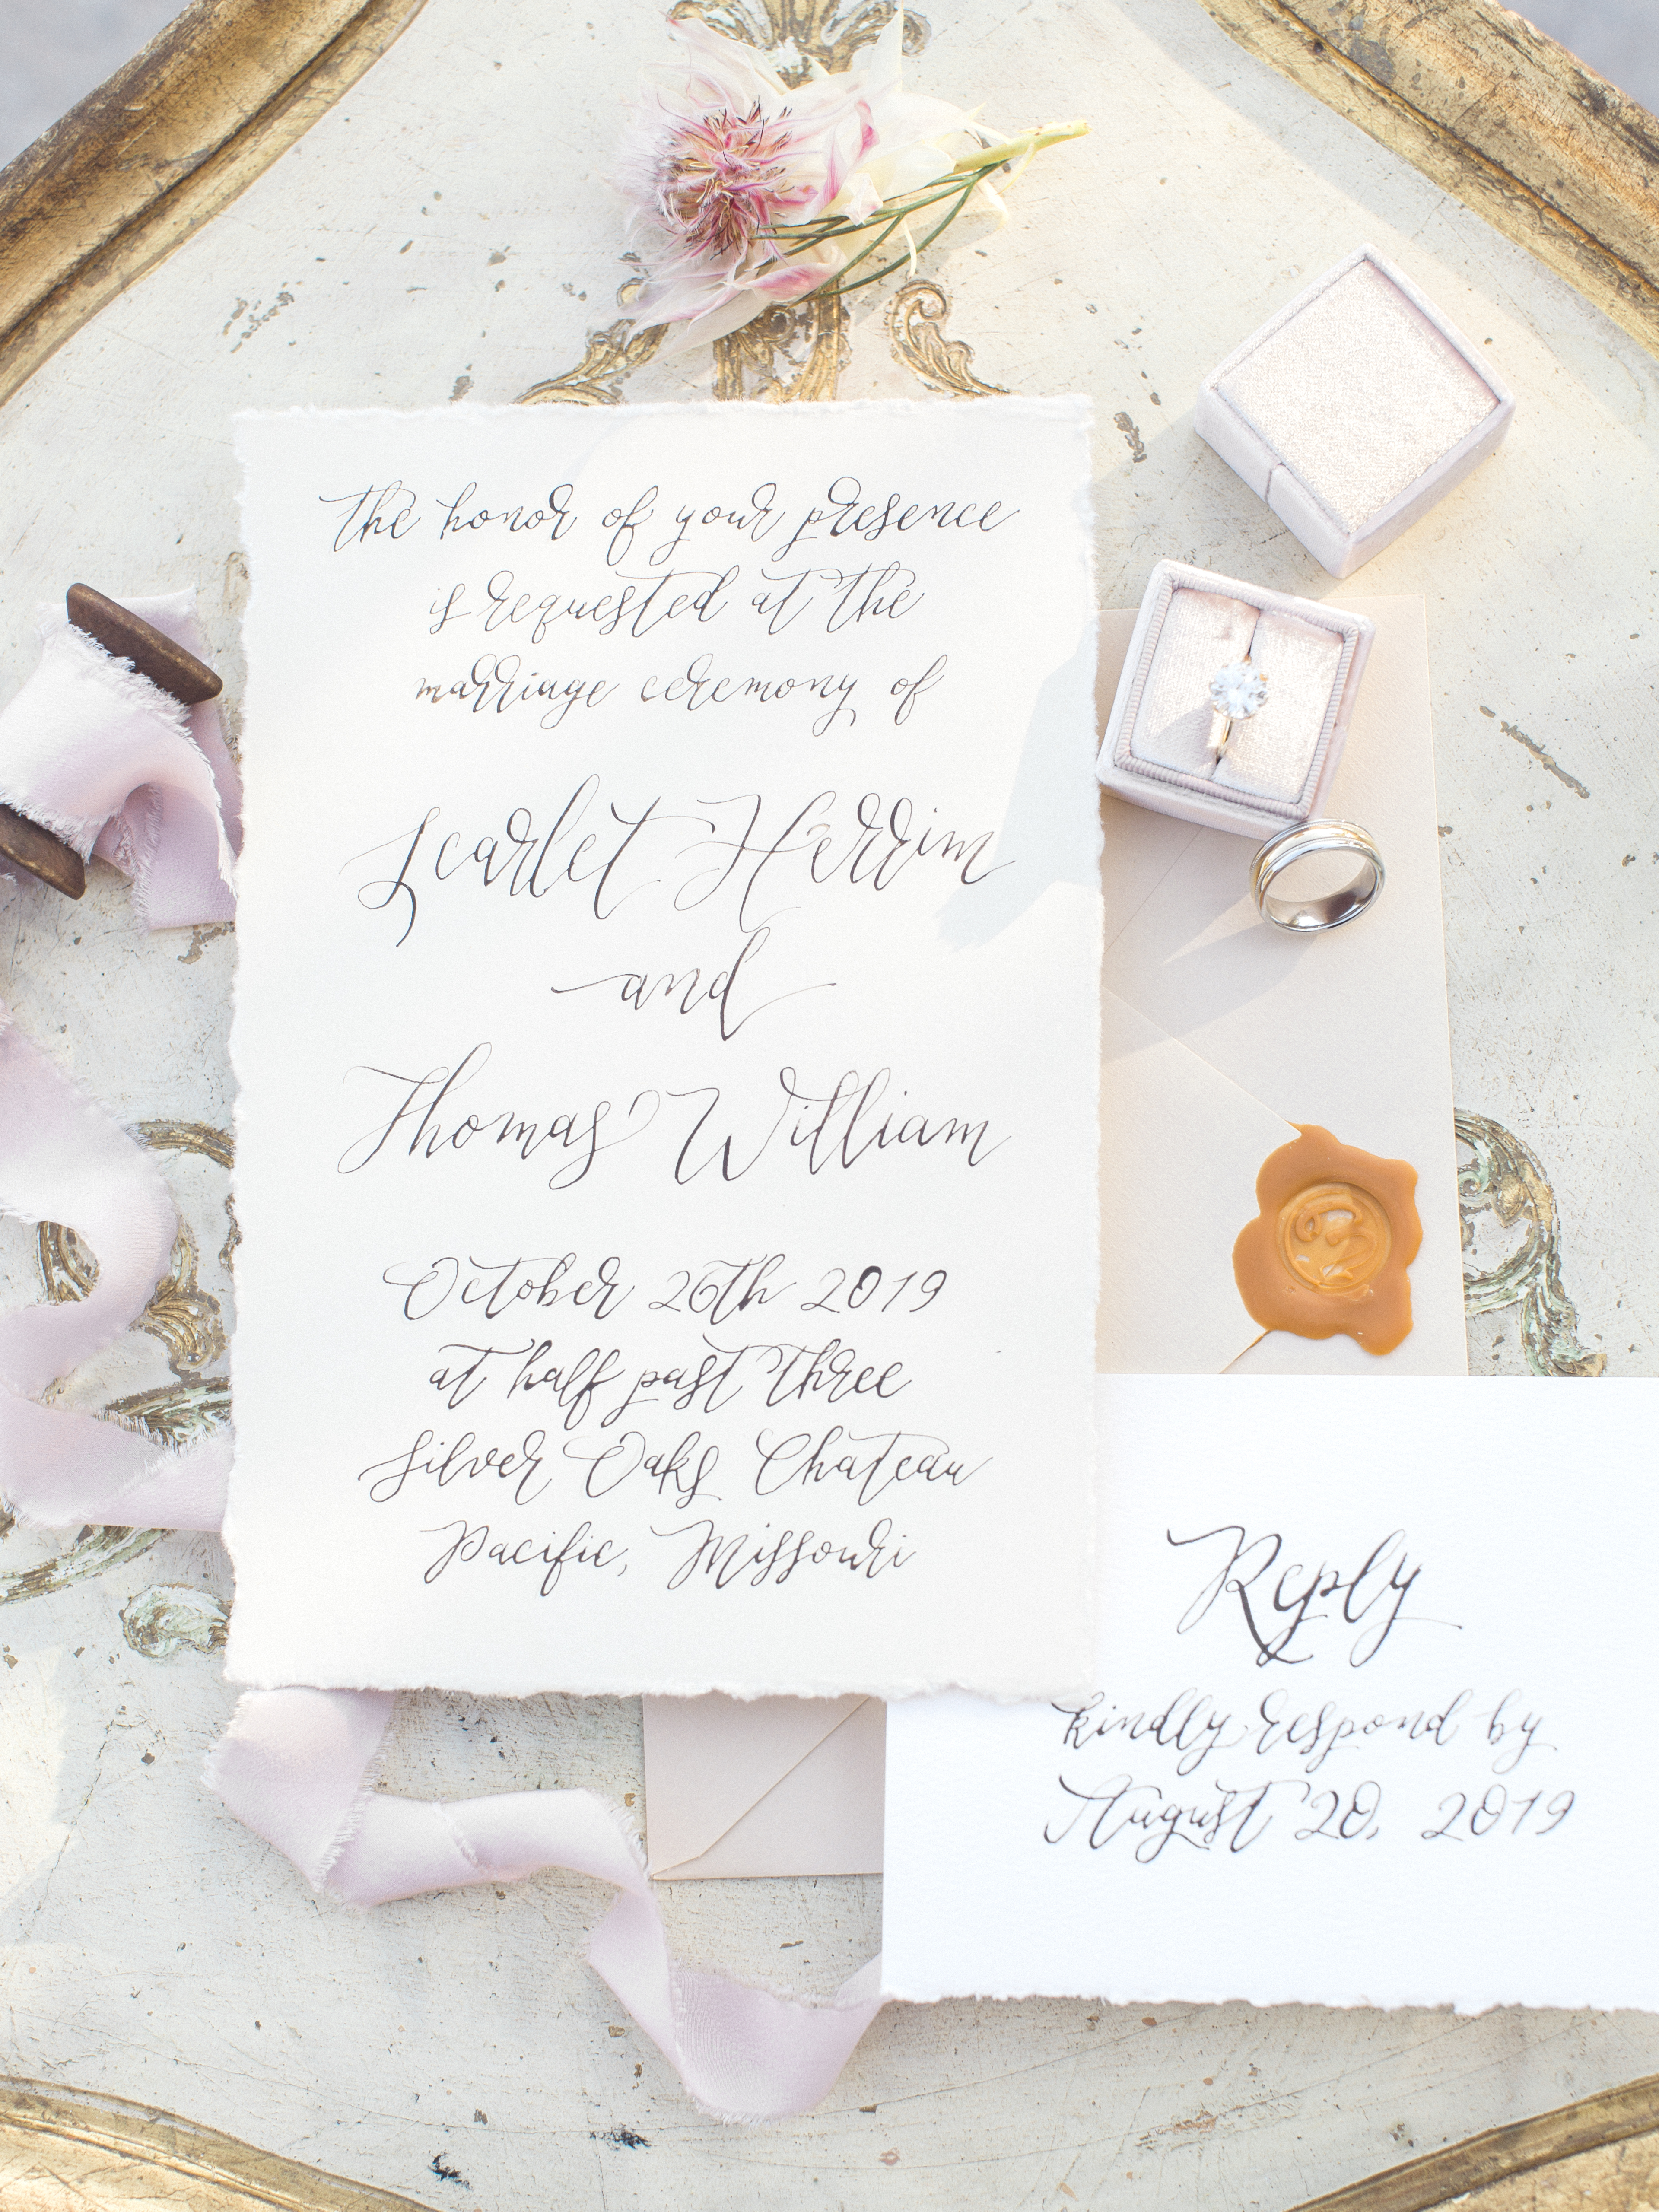 Handwritten Wedding Invitations by The Ink Cafe photographed by Love Tree Studios.